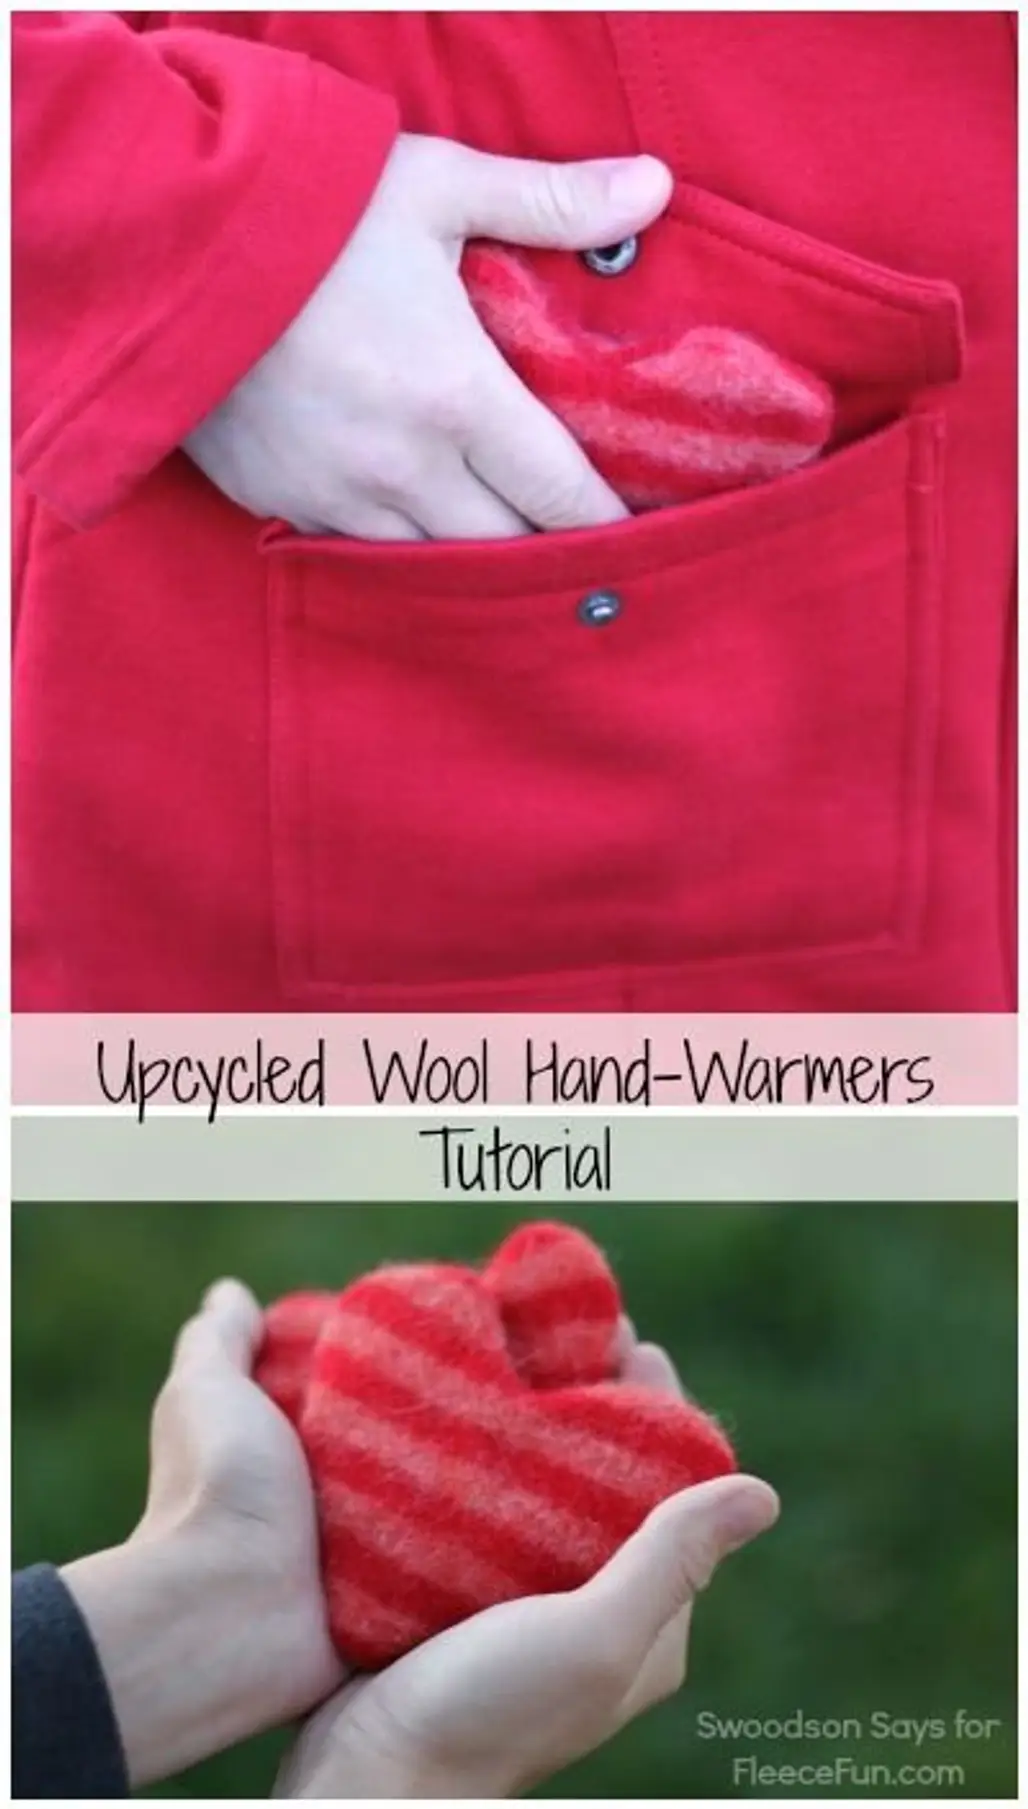 How to Make Heart Hand Warmers